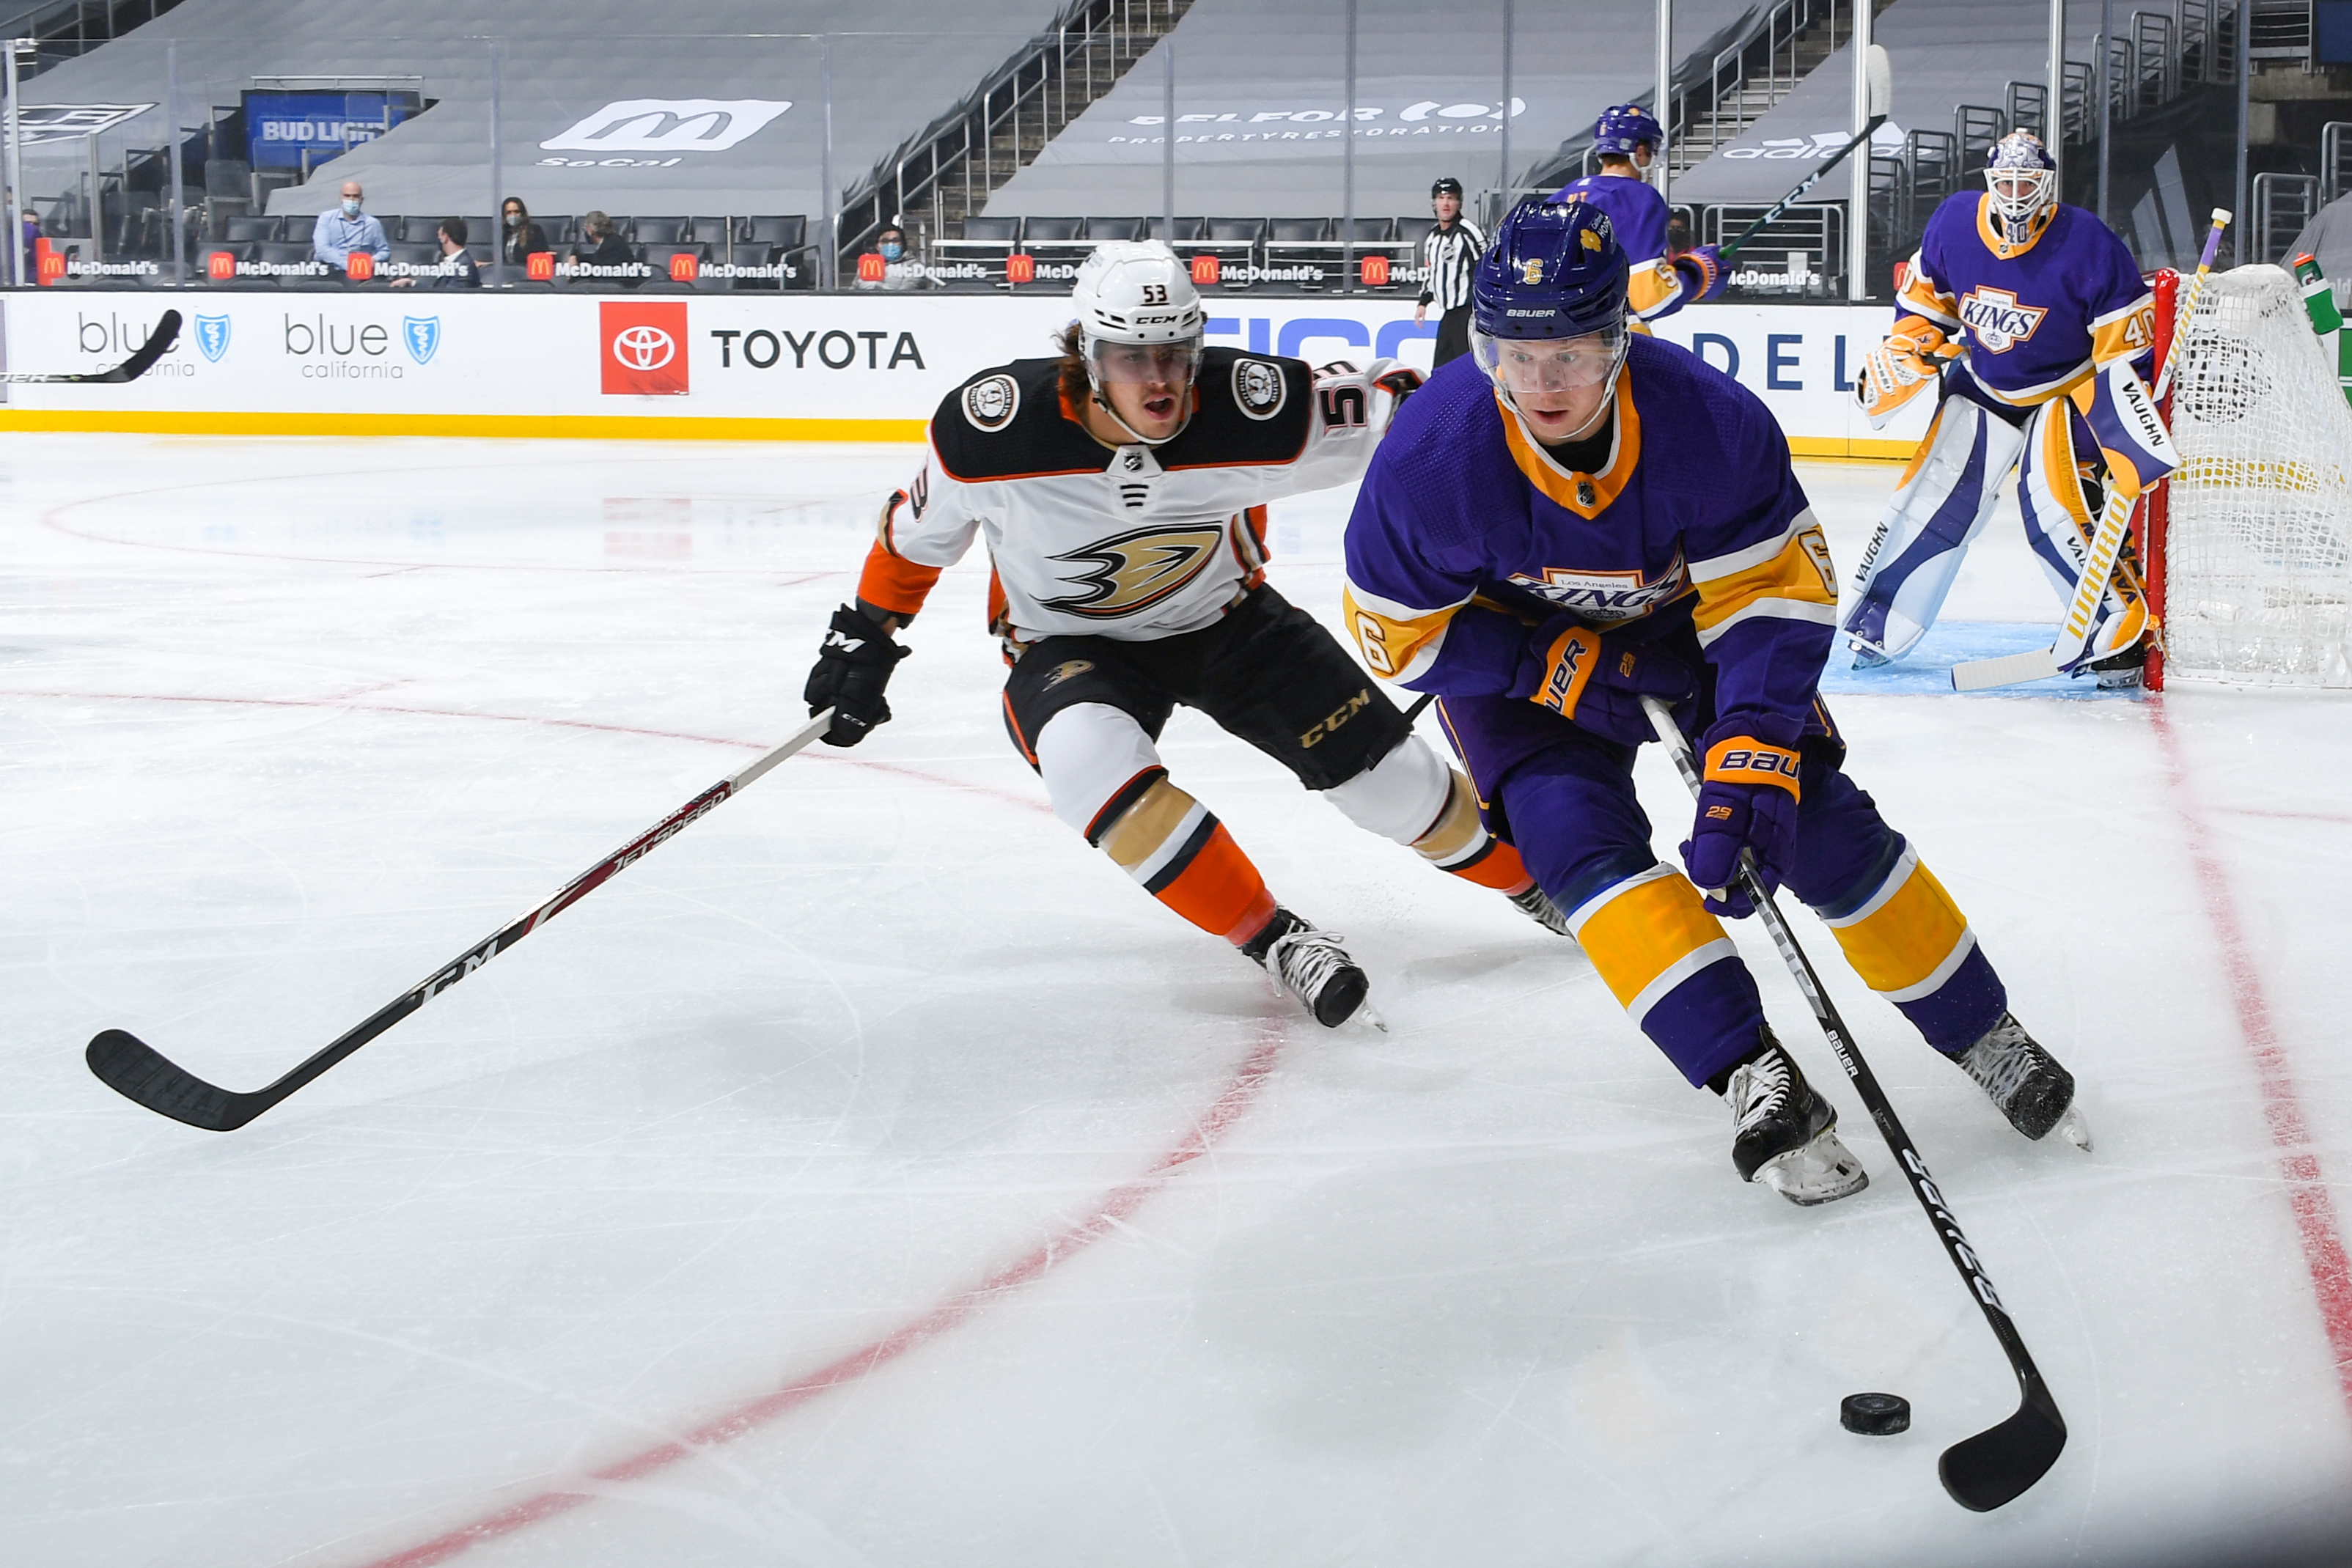 Max Comtois #53 of the Anaheim Ducks and and Olli Maatta #6 of the Los Angeles Kings battle for position during the first period at STAPLES Center on February 2, 2021 in Los Angeles, California.